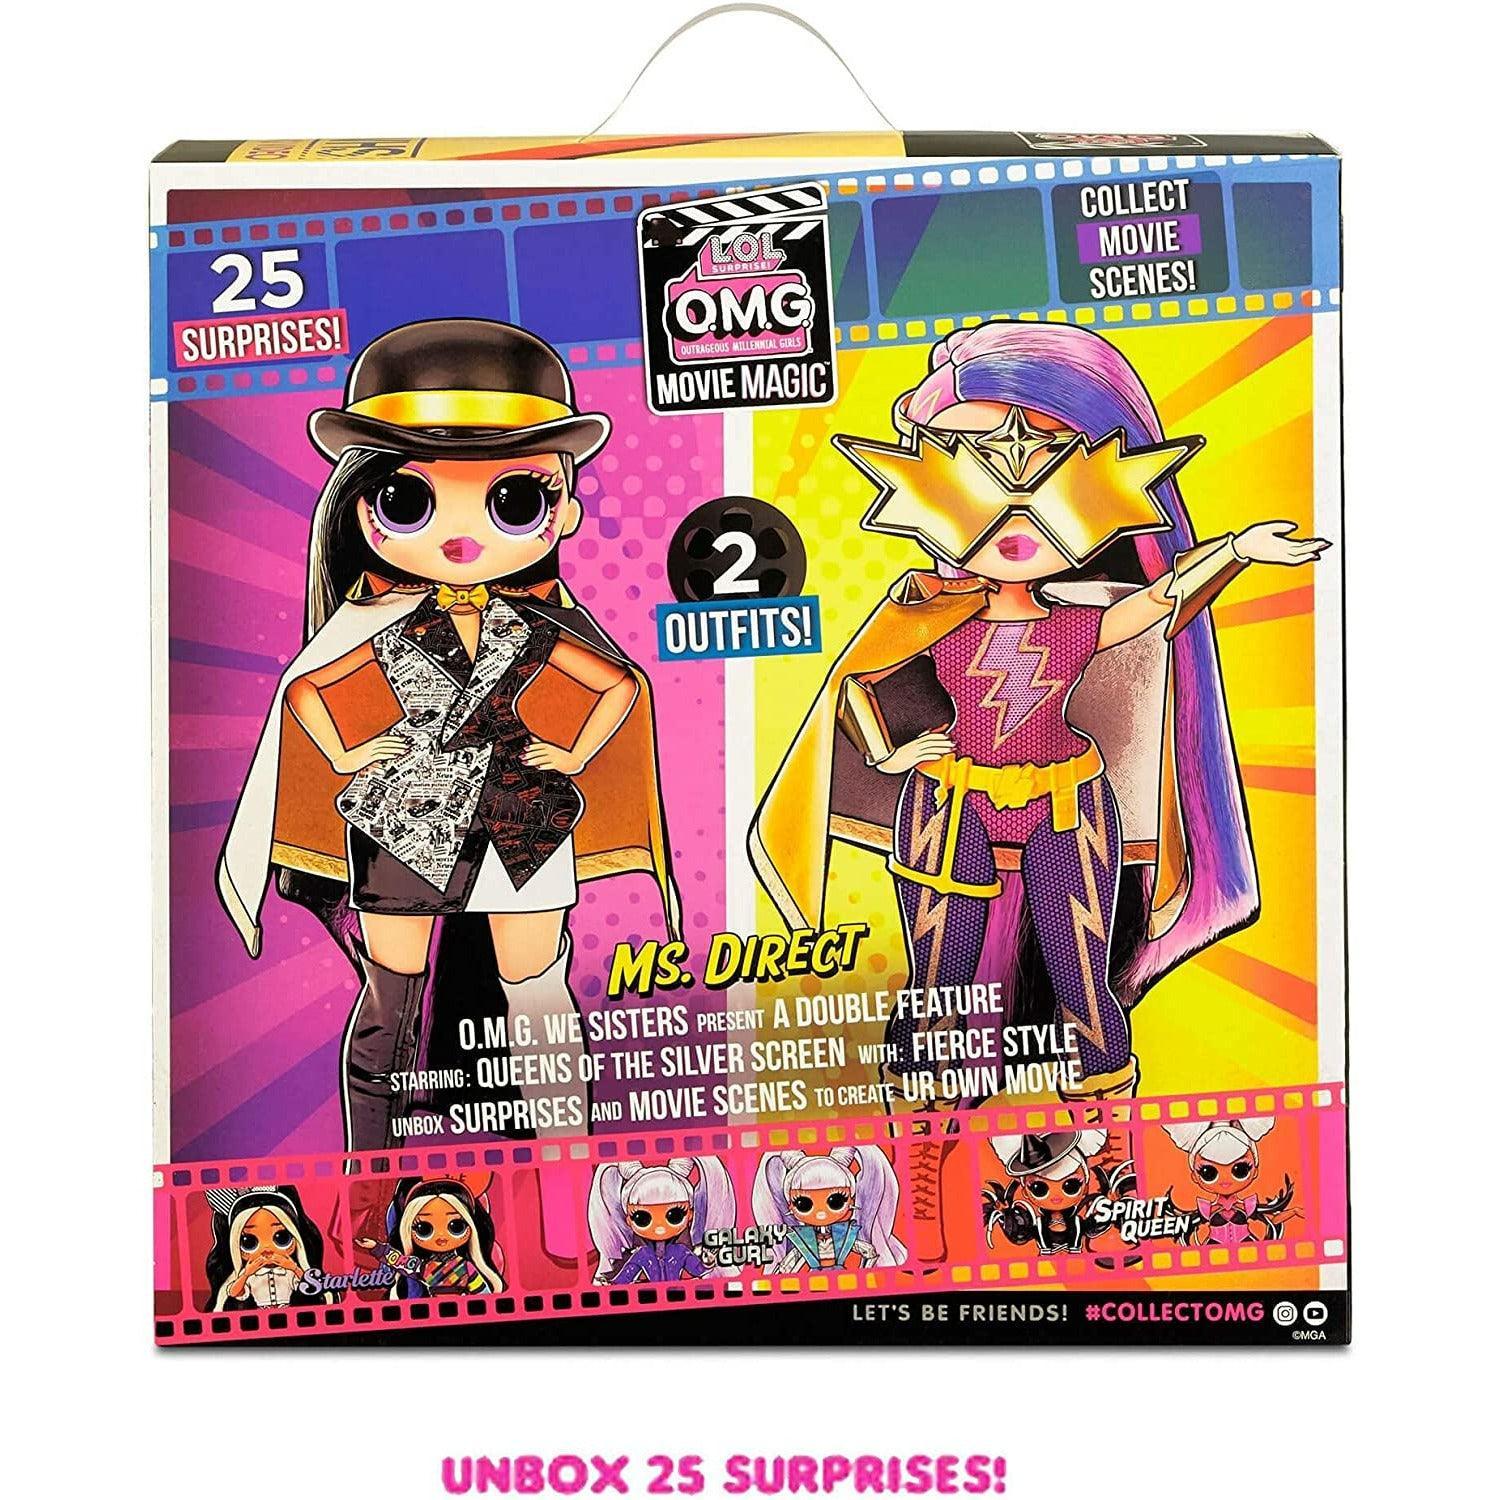 LOL Surprise OMG Movie Magic Ms. Direct Fashion Doll with 25 Surprises Including 2 Outfits, 3D Glasses, Movie Accessories - BumbleToys - 5-7 Years, Dolls, Fashion Dolls & Accessories, Girls, L.O.L